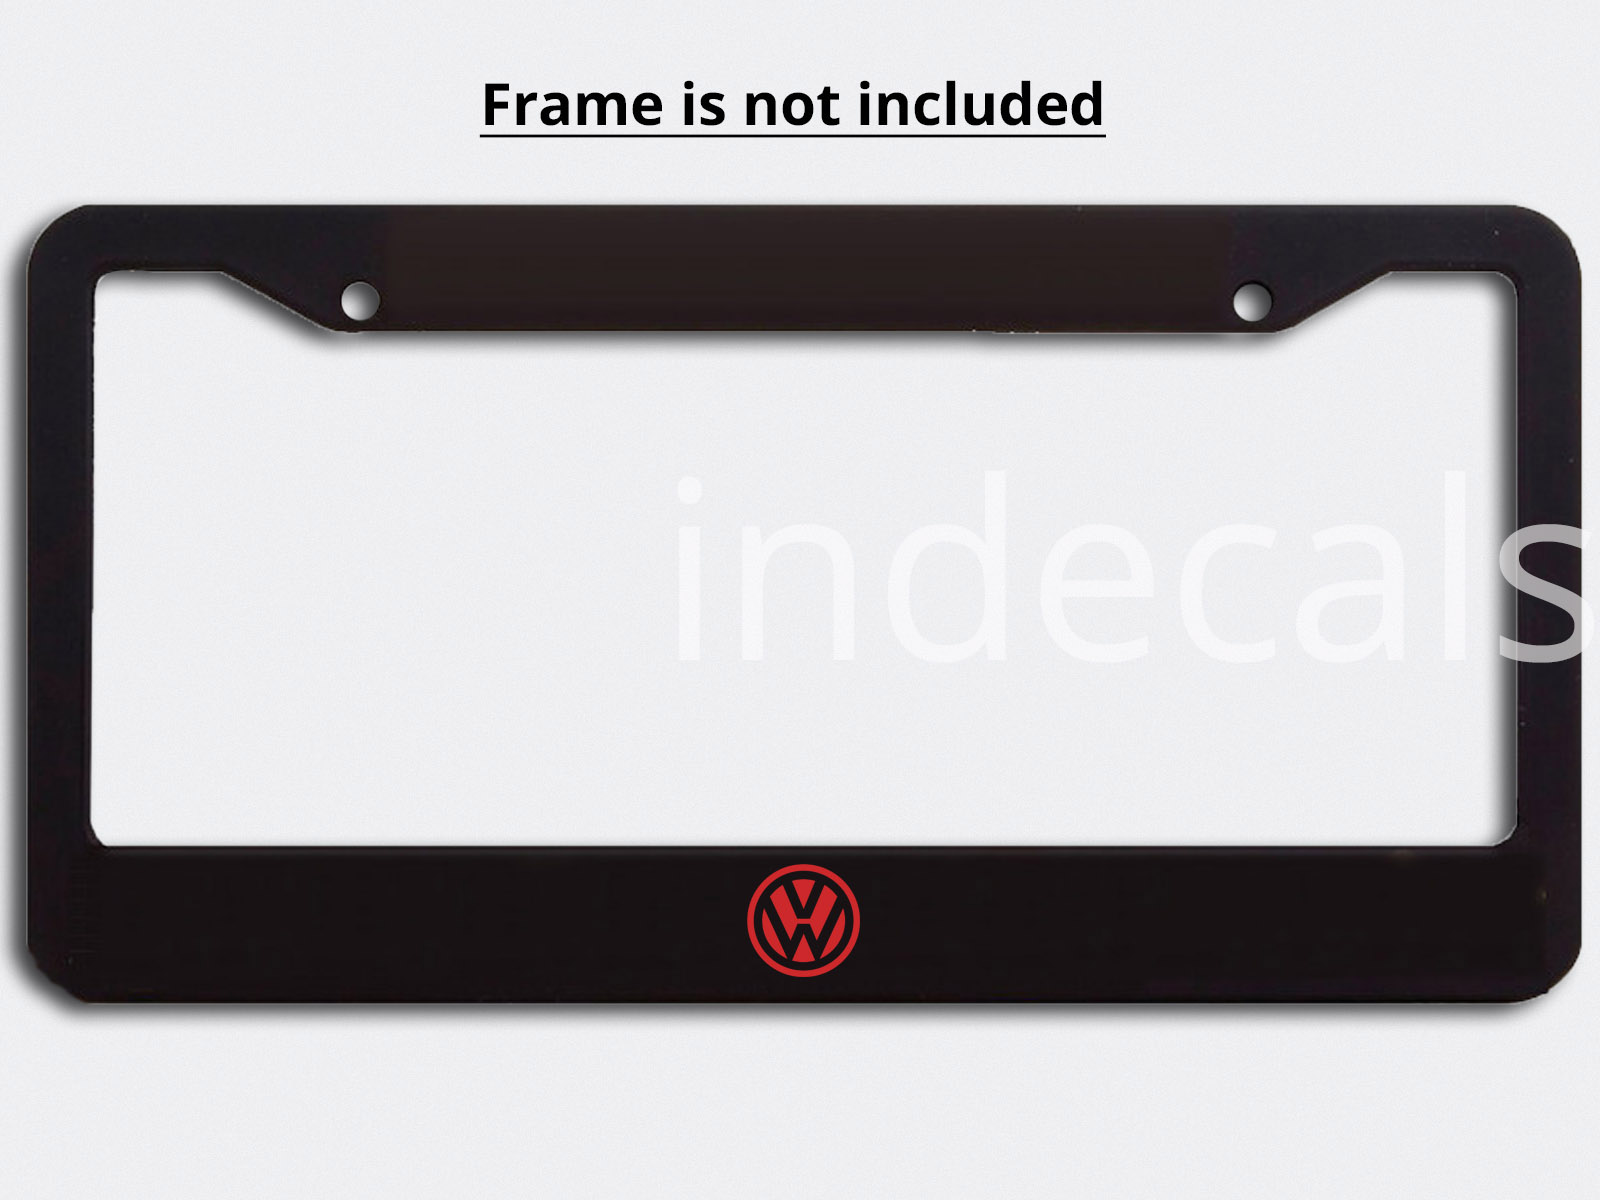 3 x Volkswagen Stickers for License Plate Frame - Red